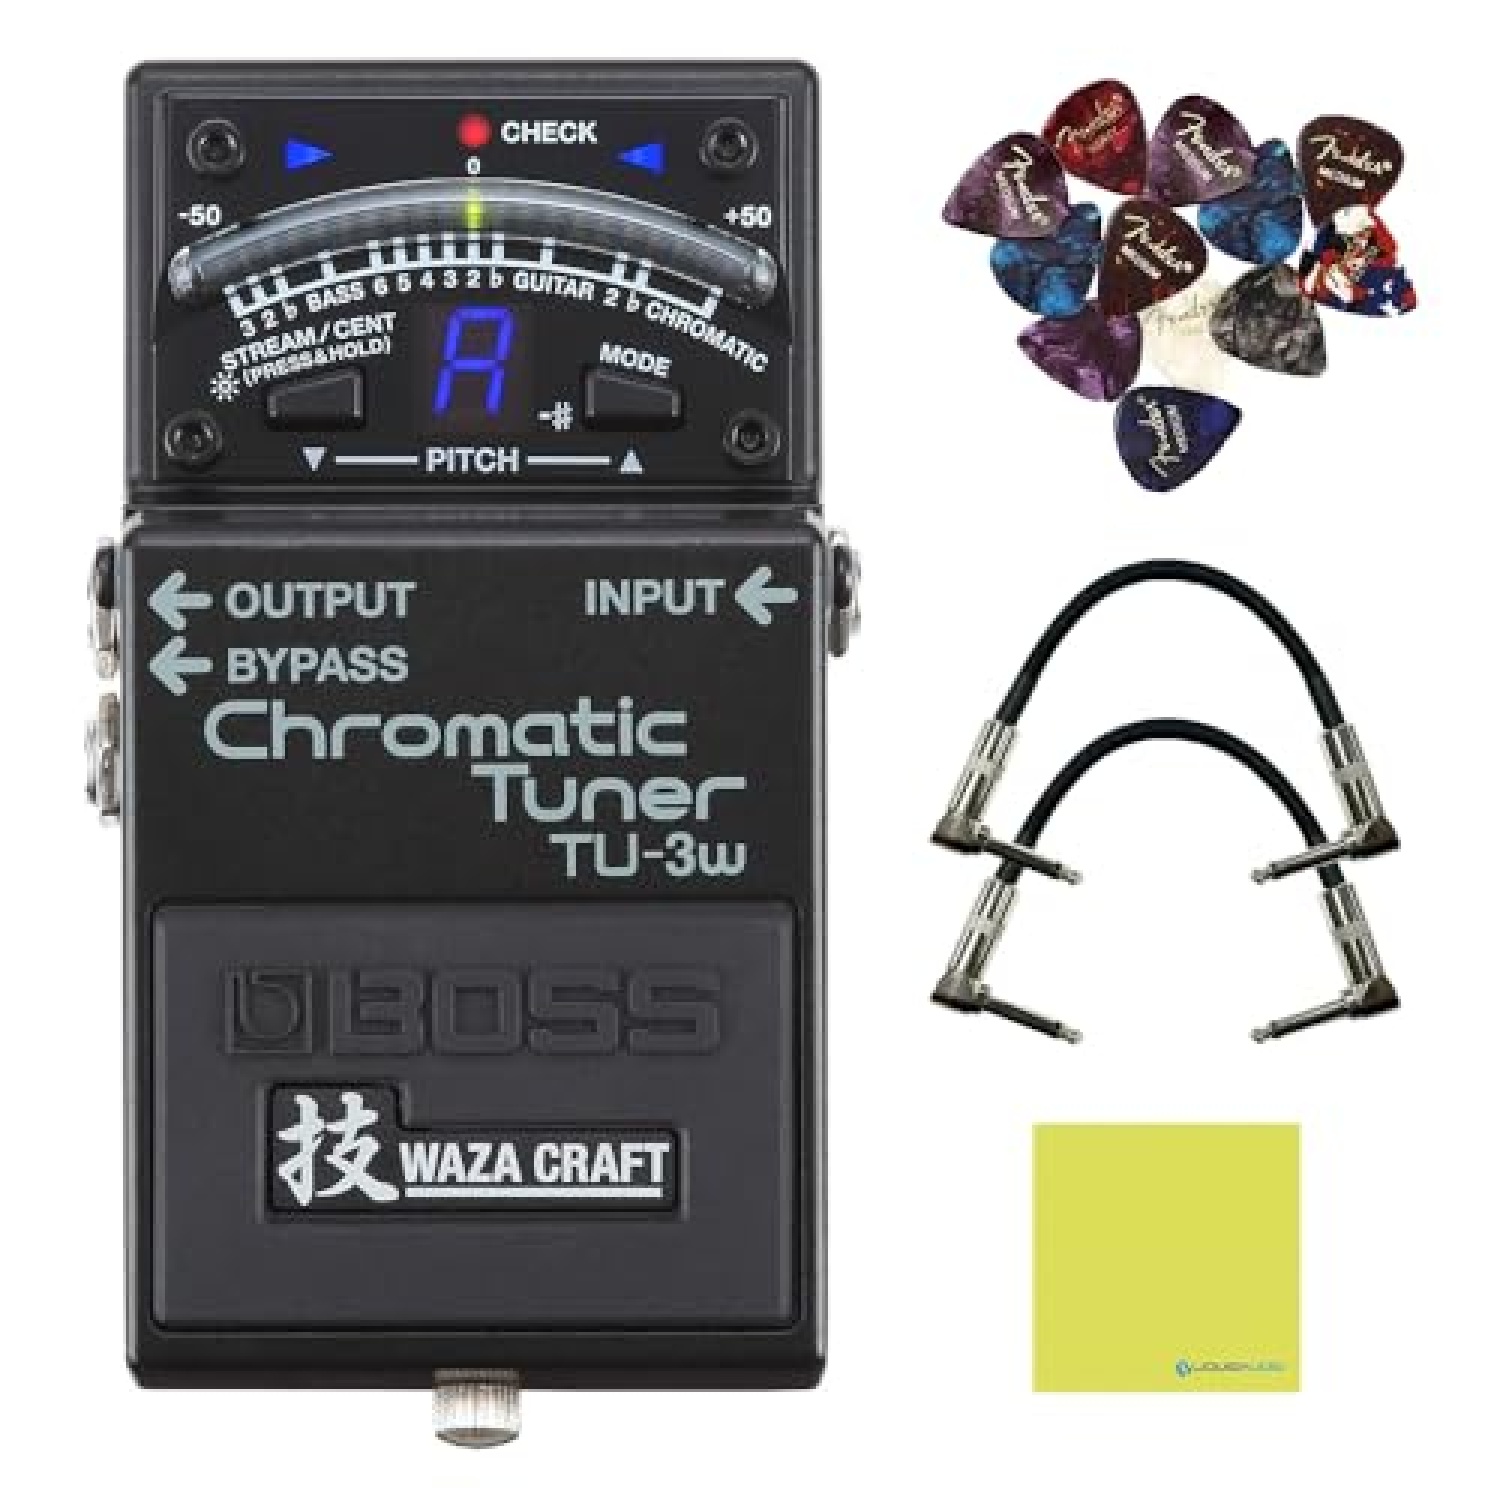 Boss TU-3W Waza Craft Chromatic Tuner with Bypass Bundle w/2x Strukture S6P48 Woven Right Angle Patch Cables, 12x Guitar Picks and Liquid Audio Polishing Cloth